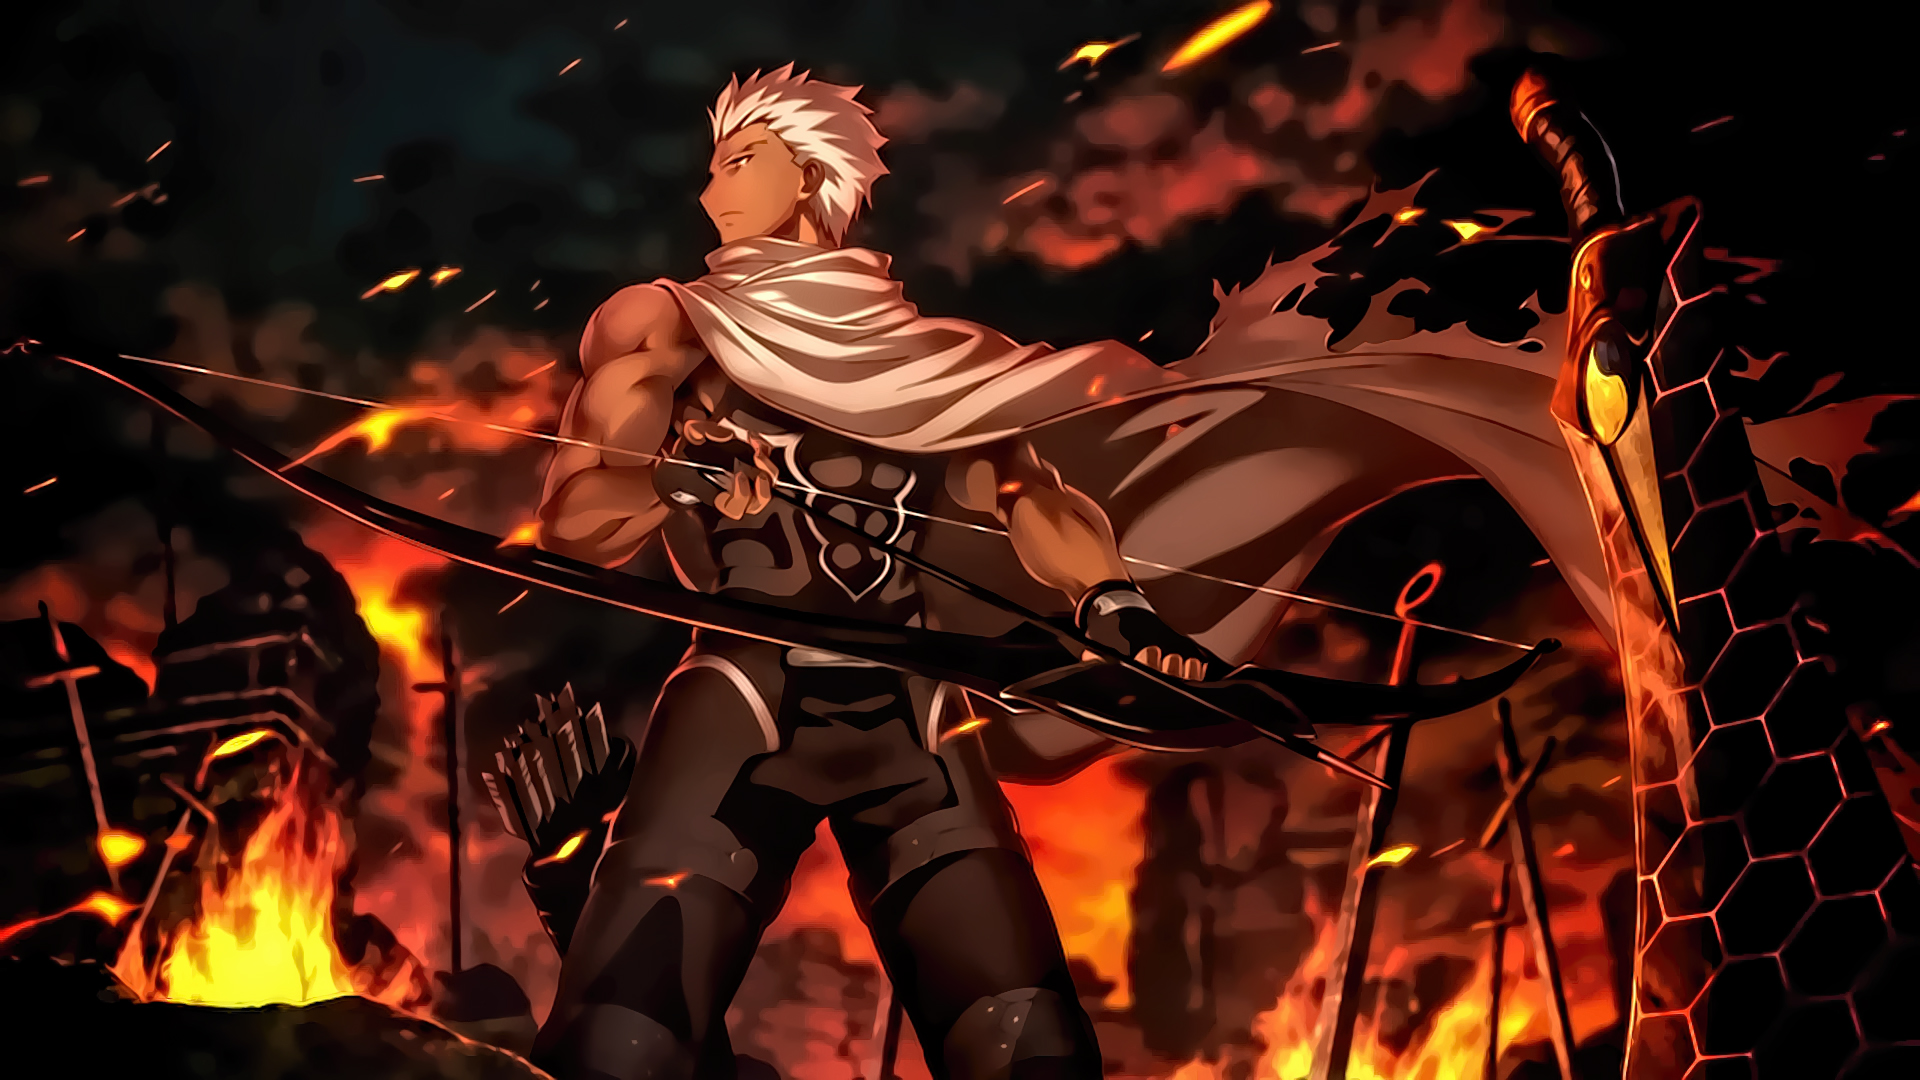 Fate Stay Night: Unlimited Blade Works Pics, Anime Collection